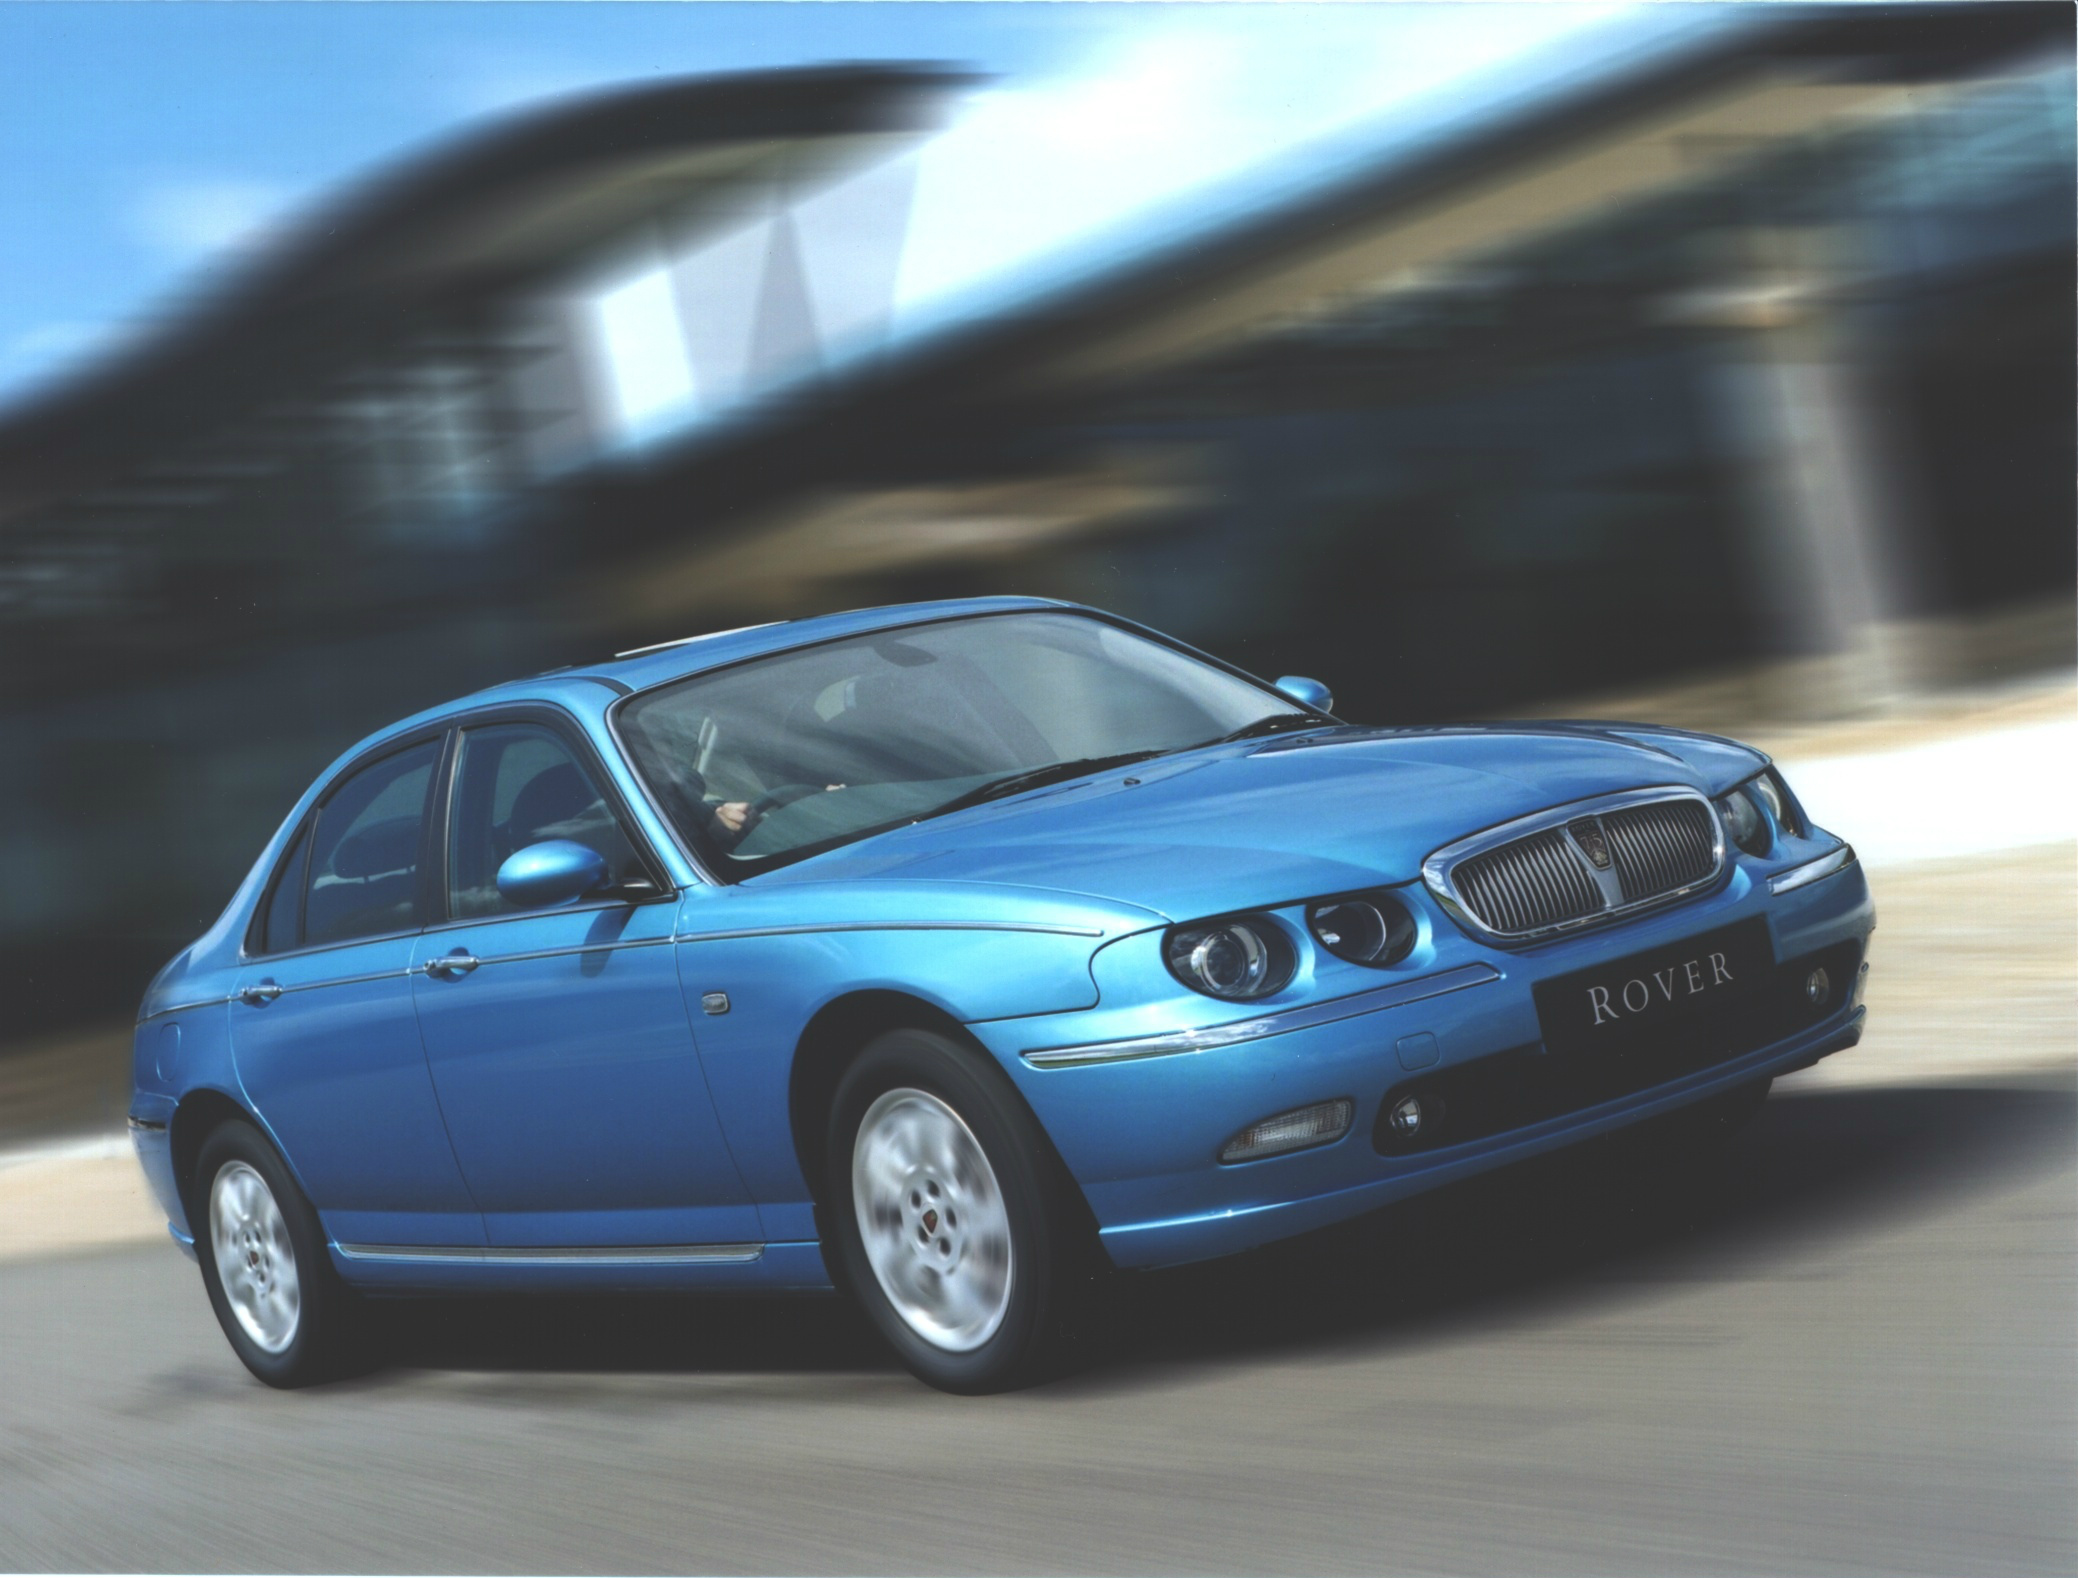 Rover 75 for £1000